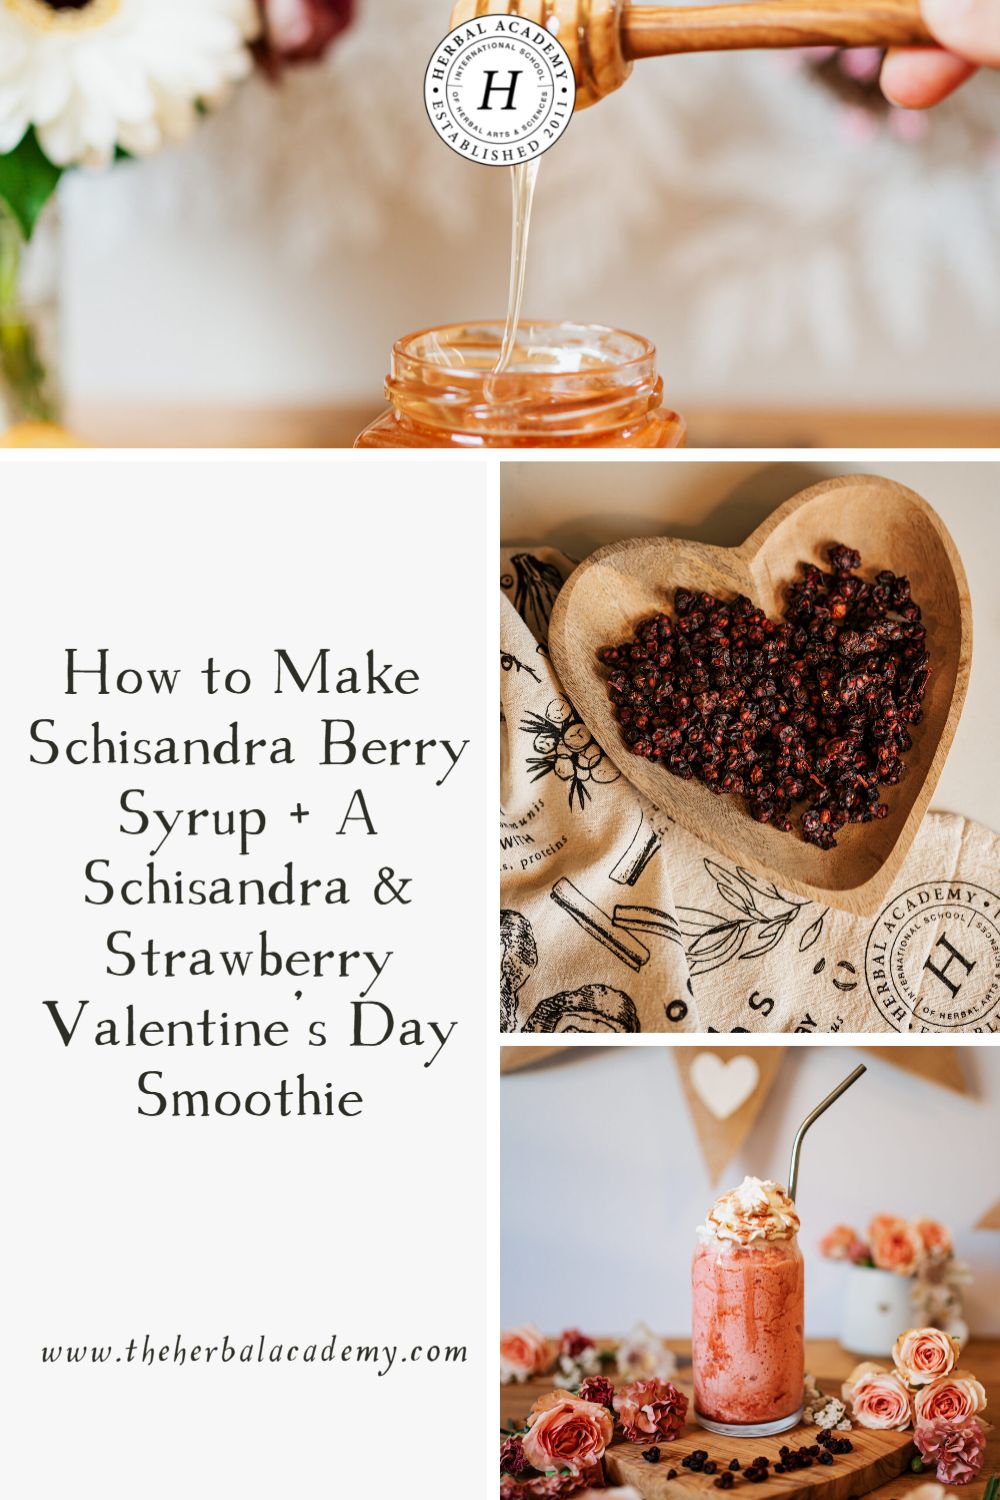 How to Make Schisandra Berry Syrup + A Schisandra & Strawberry Valentine's Day Smoothie | Herbal Academy | You’re going to love this schisandra berry herbal syrup preparation, and delicious Schisandra & Strawberry Valentine’s Day smoothie!